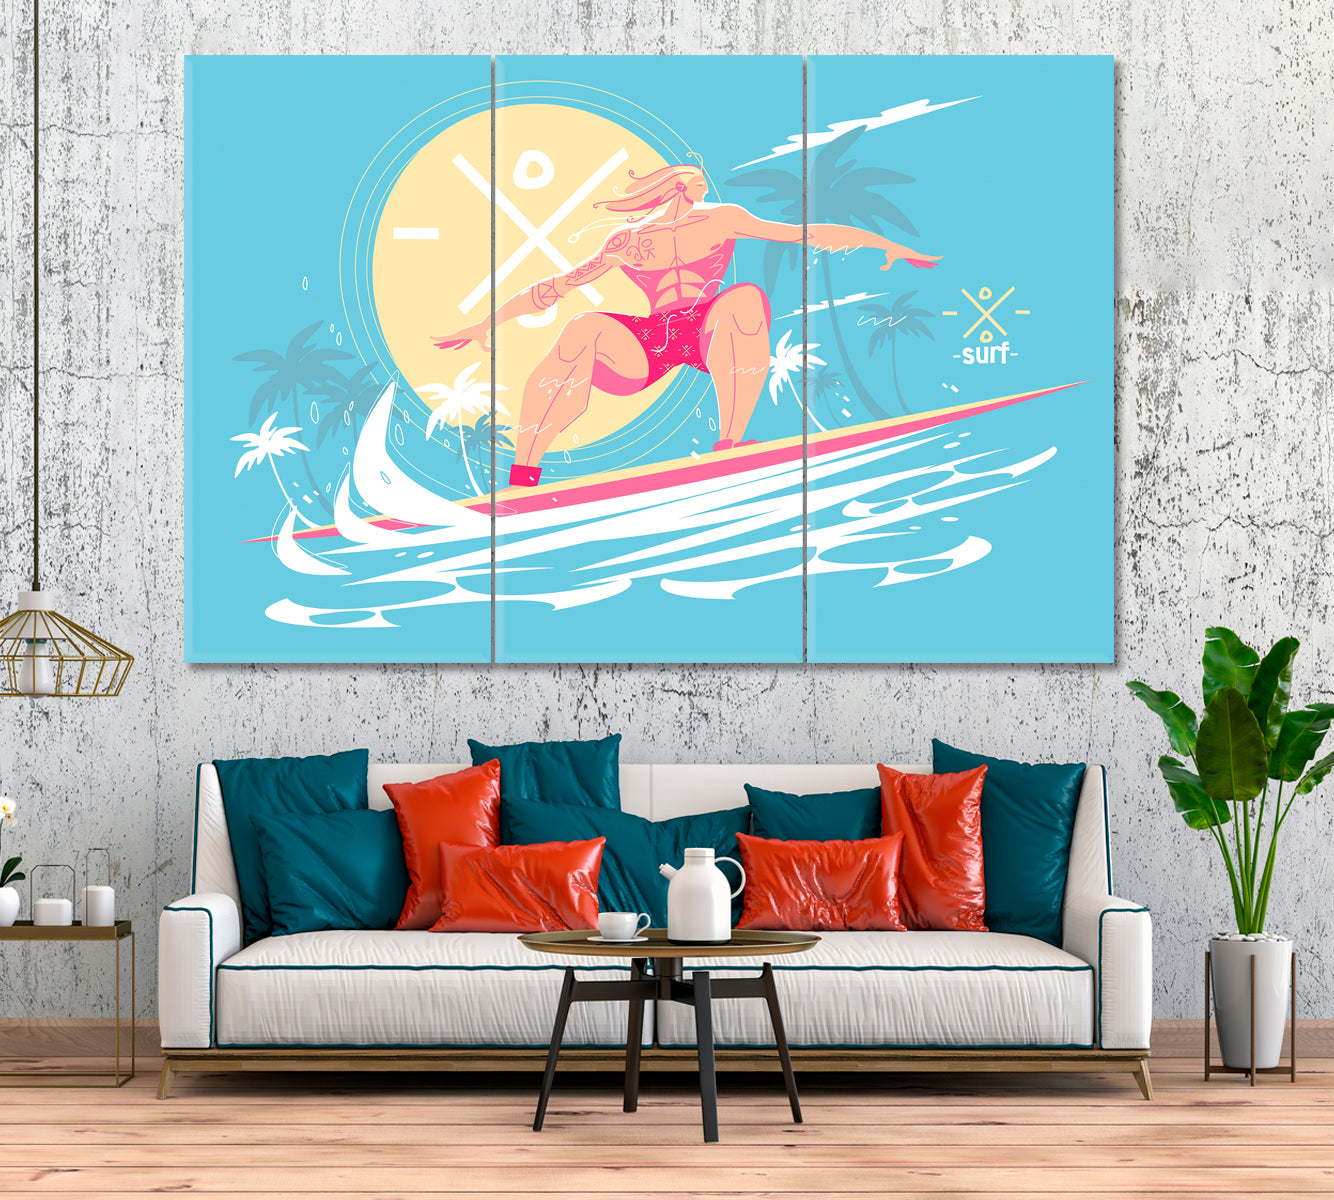 Surfer on Ocean Waves Canvas Print ArtLexy 3 Panels 36"x24" inches 